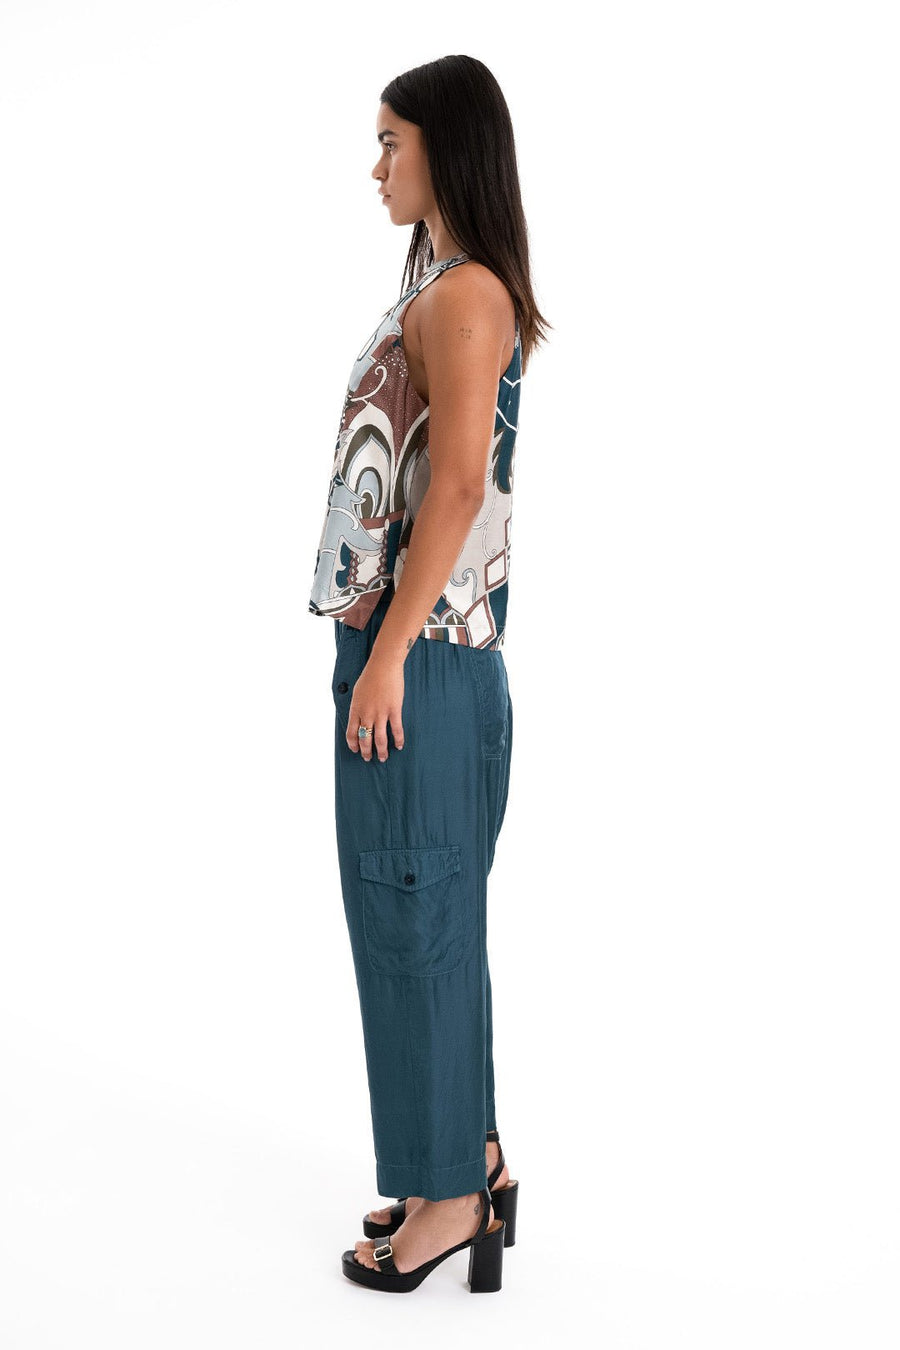 WHITNEY DROP CROTCH PANT, MARINE - Burning Torch Online Boutique